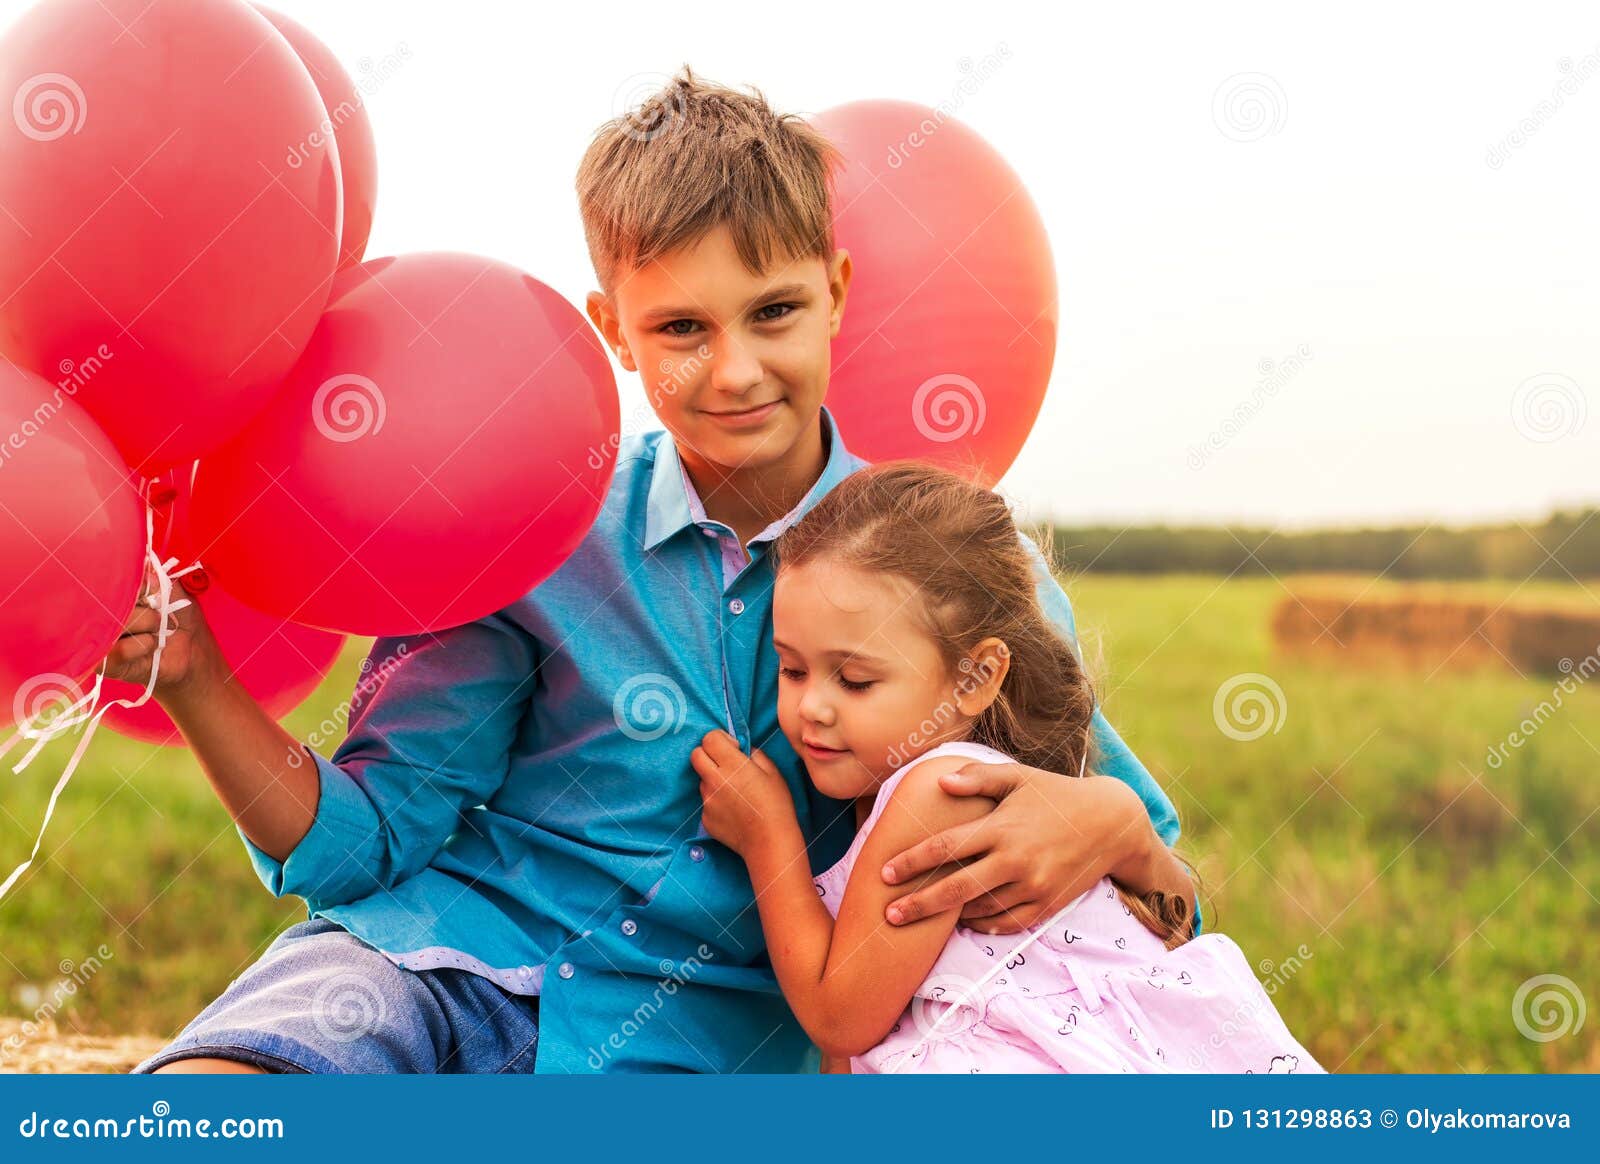 Older Brother Hugs Sister In The Summer In Nature Stock Image Image Of Happy Summer 131298863